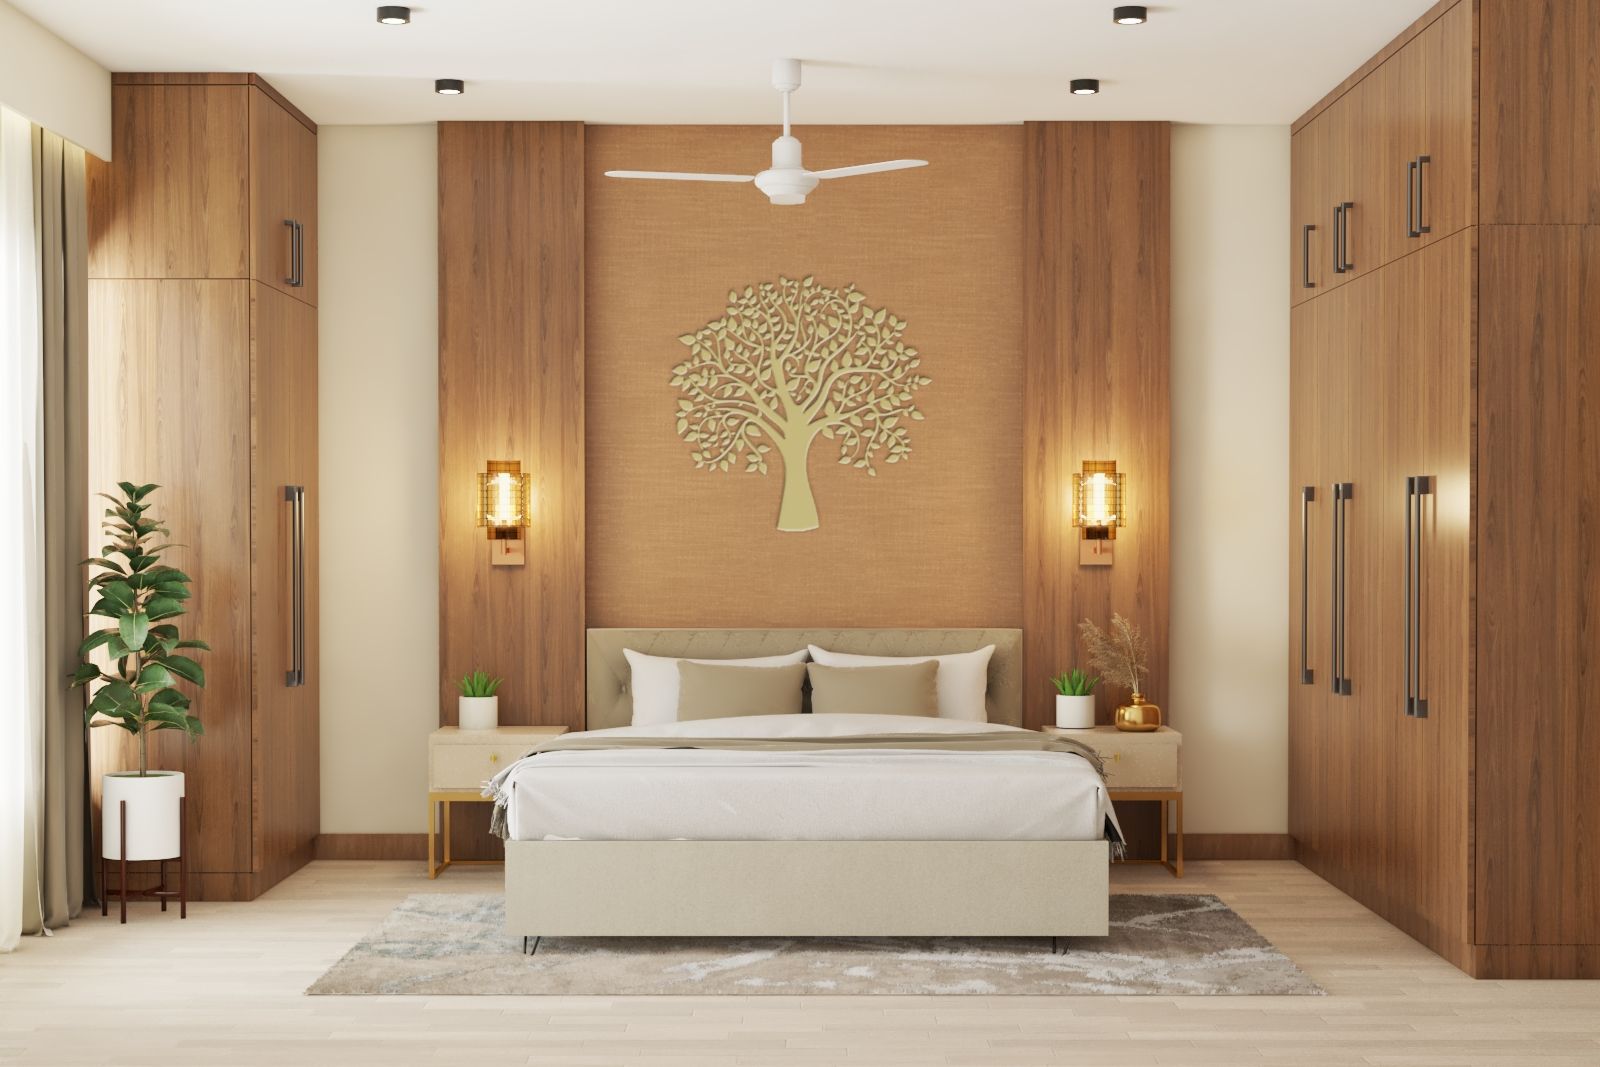 Classic Master Bedroom Design With Wooden Accent Wall